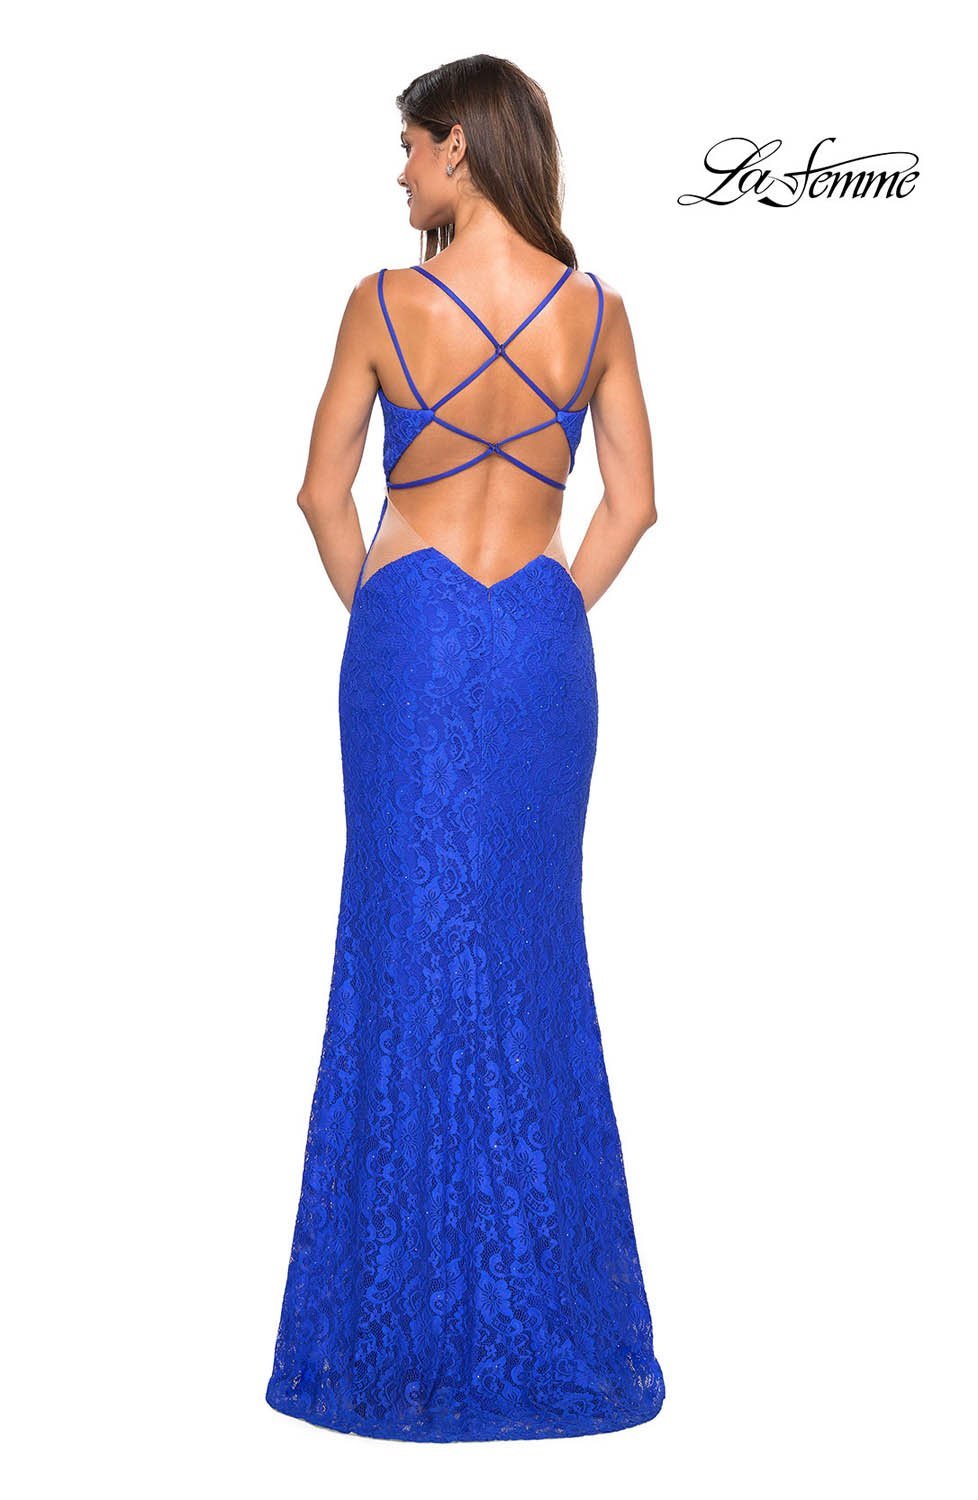 La Femme 27029 dress images in these colors: Black, Electric Blue, Red, White.